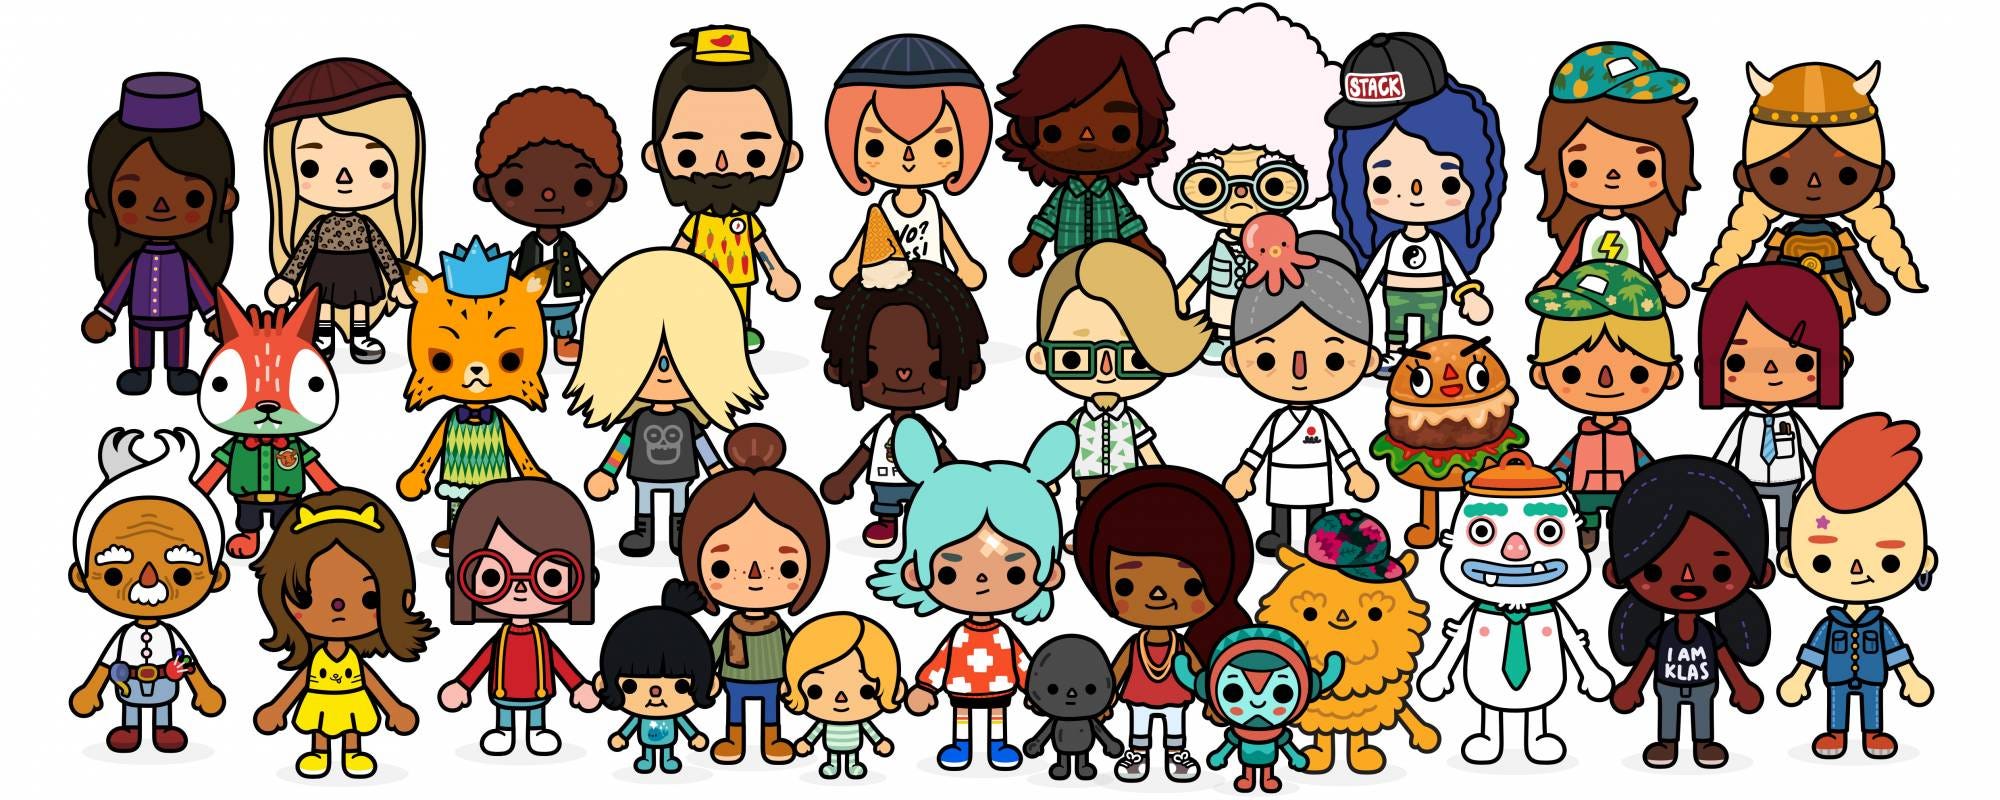 The Toca Boca Story. From Sweden To San Francisco, by Danielle Newnham, The Startup